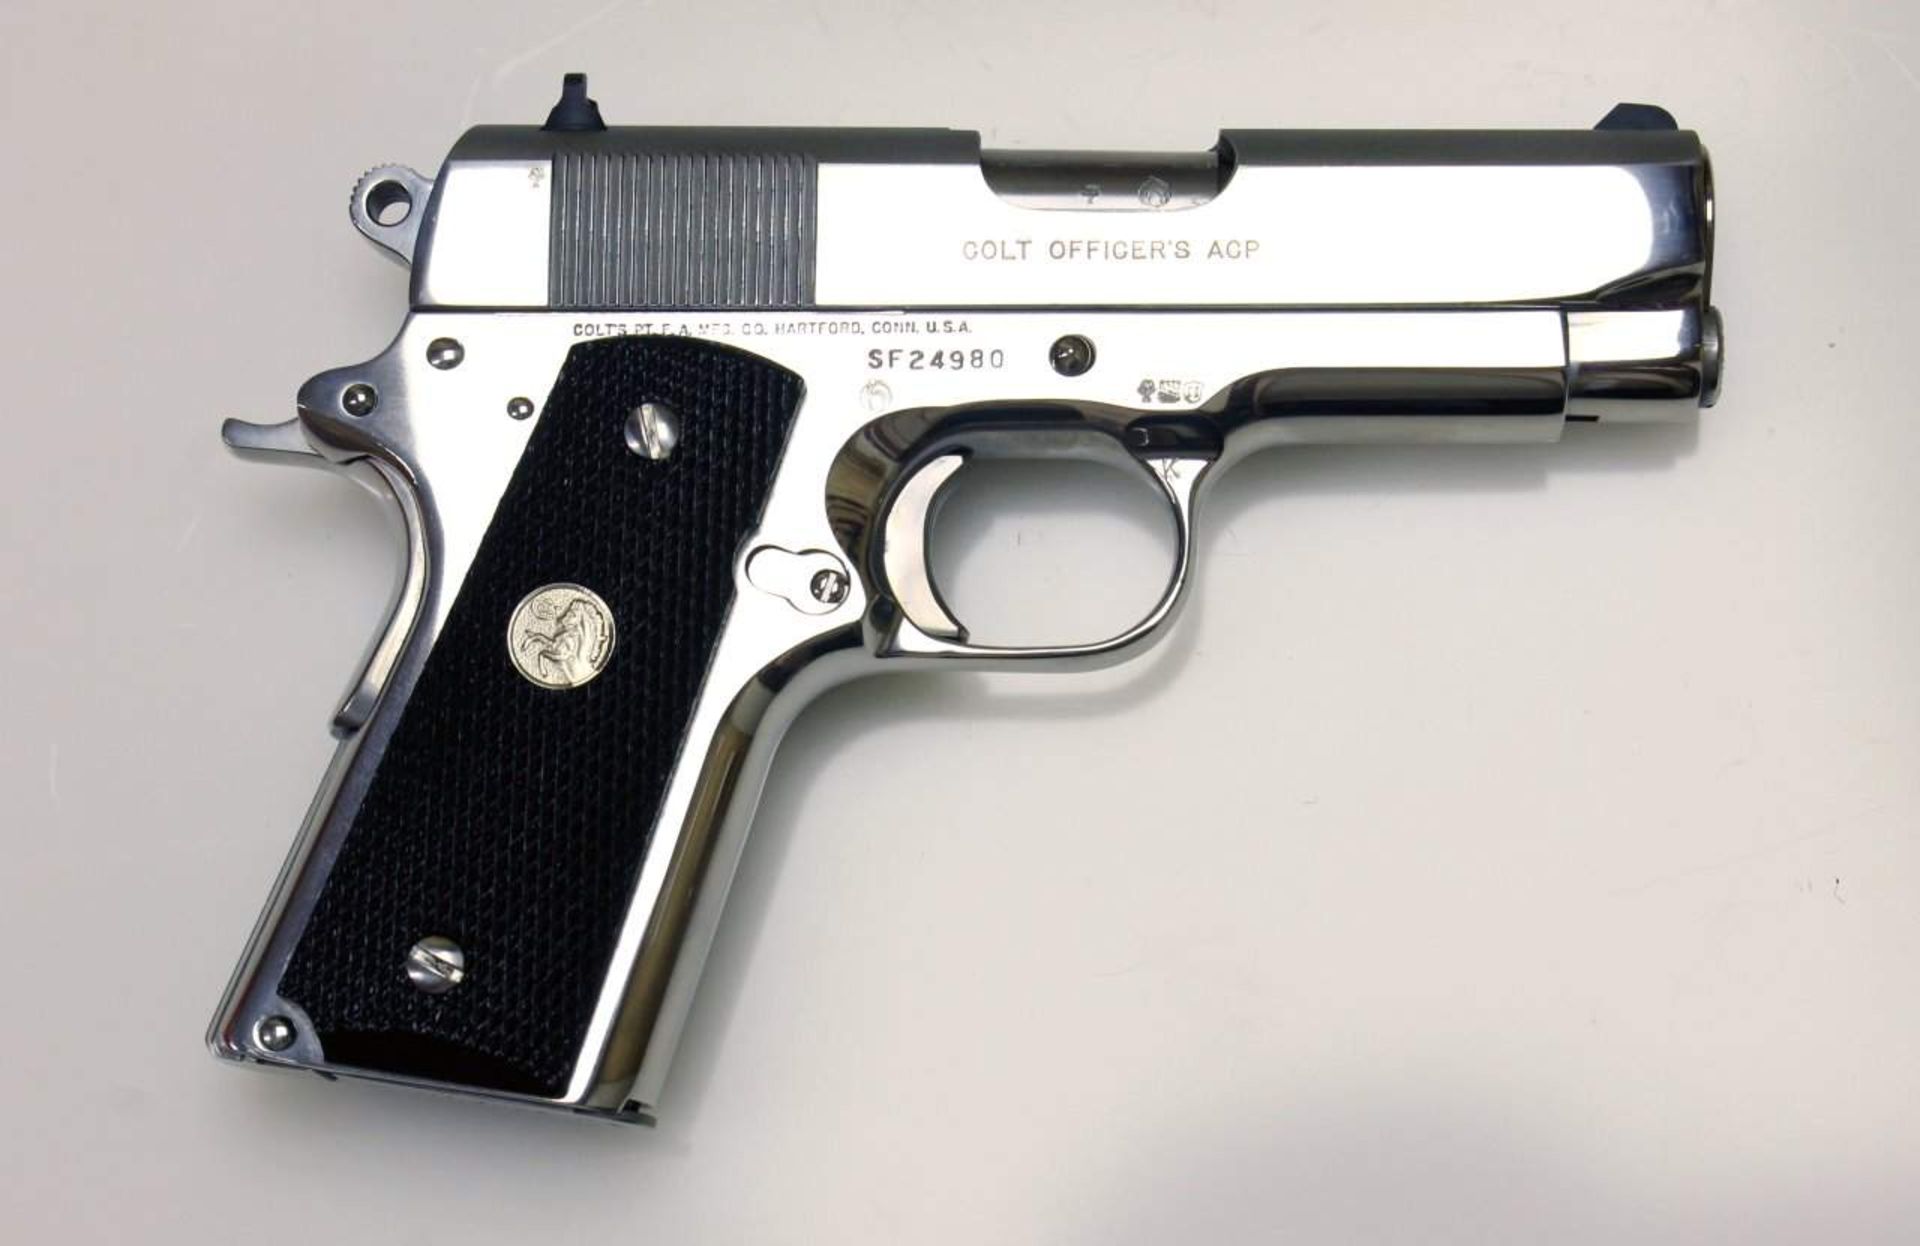 Selbstladepistole Colt, Modell: 1911 - Series 80 - MK IV - Officers ACP Cal. .45 ACP, S/N: